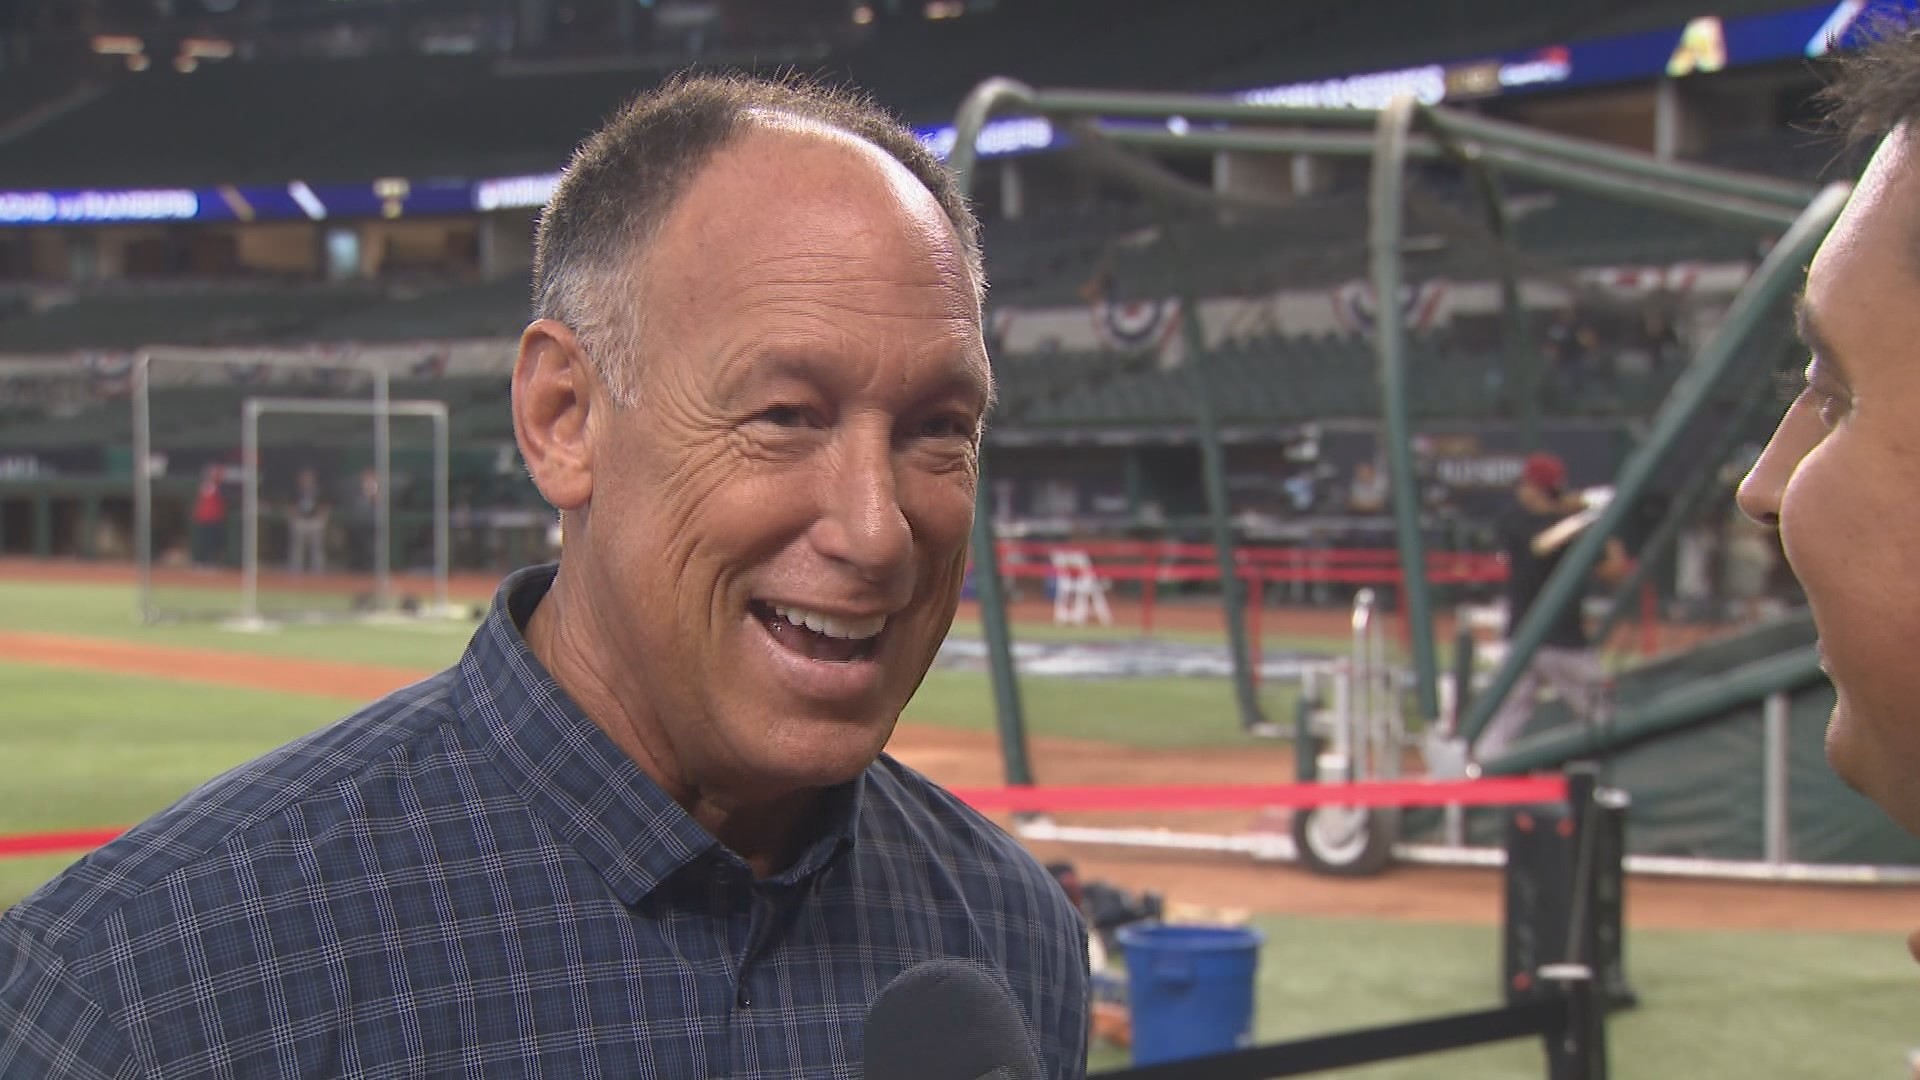 Luis Gonzalez is excited about the D-Backs pitching staff